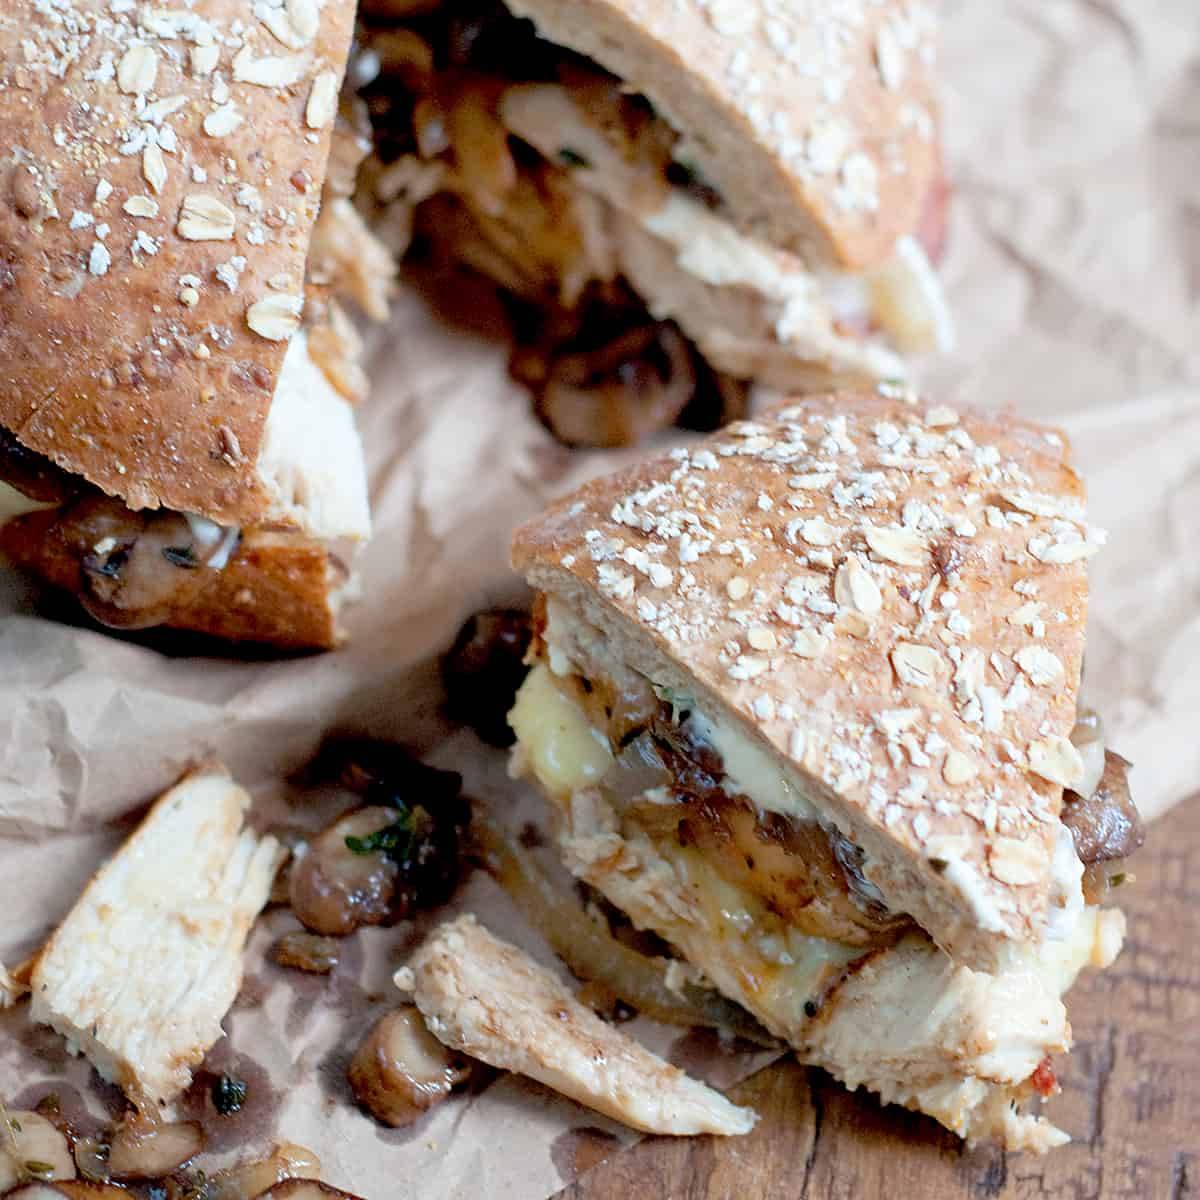 Chicken, Bacon, and Mushroom Sandwich on a whole grain boule, with garlic mayonnaise and layered with bacon, brie, caramelized onions, and mushrooms. https://www.lanascooking.com/chicken-bacon-mushroom-sandwich/